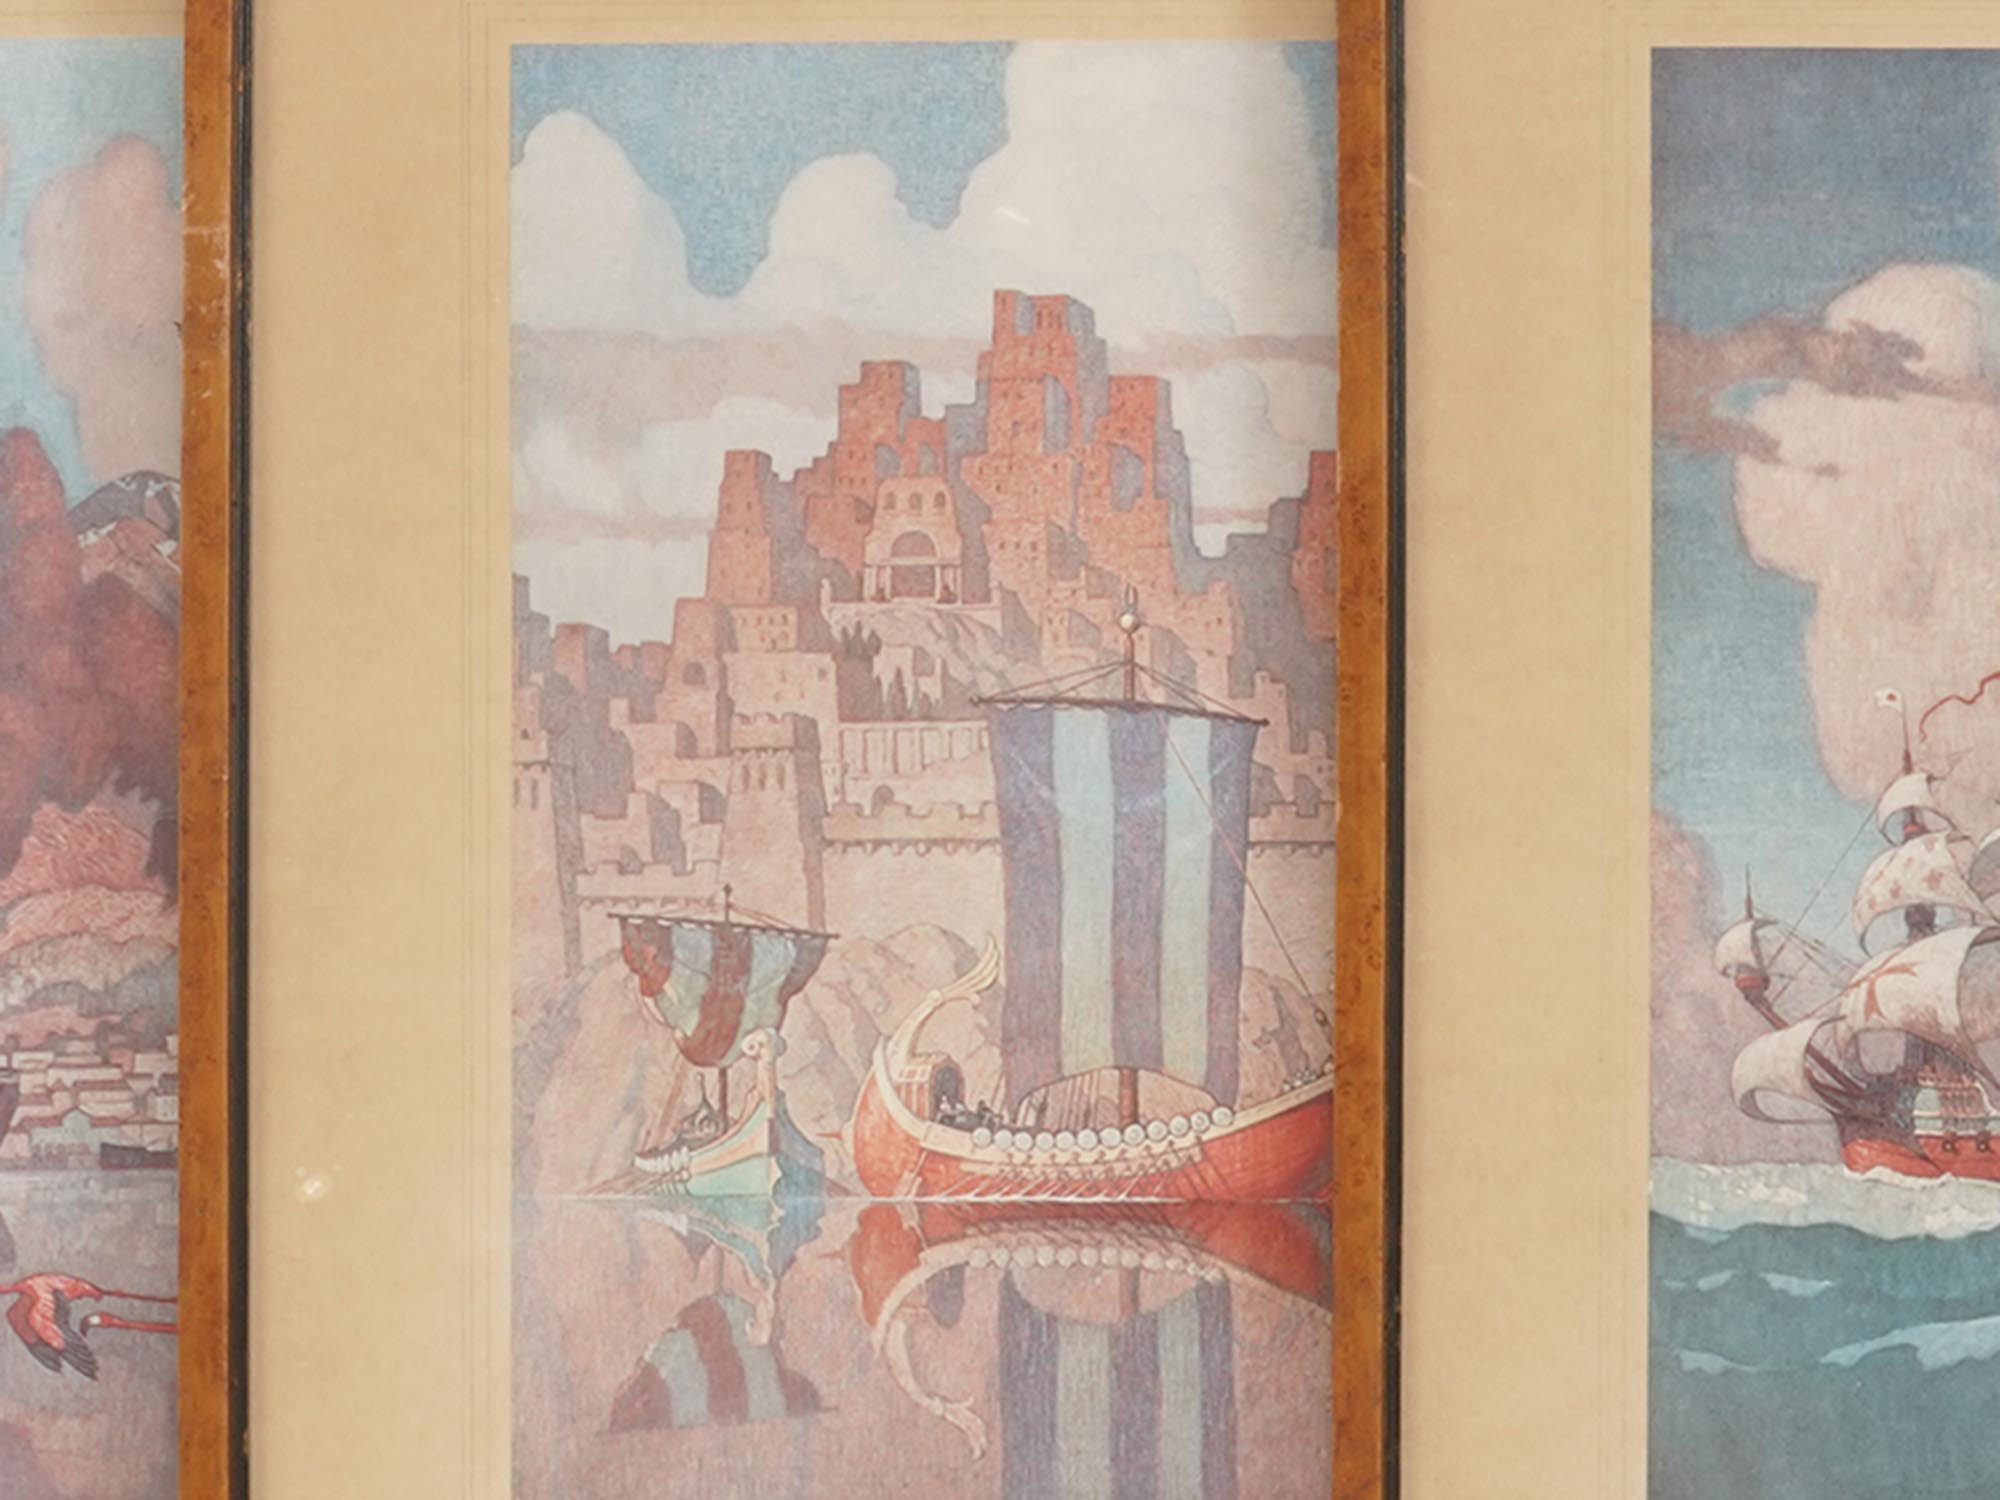 NAUTICAL PRINTS OF THE BOSTON MURALS BY NC WYETH PIC-9